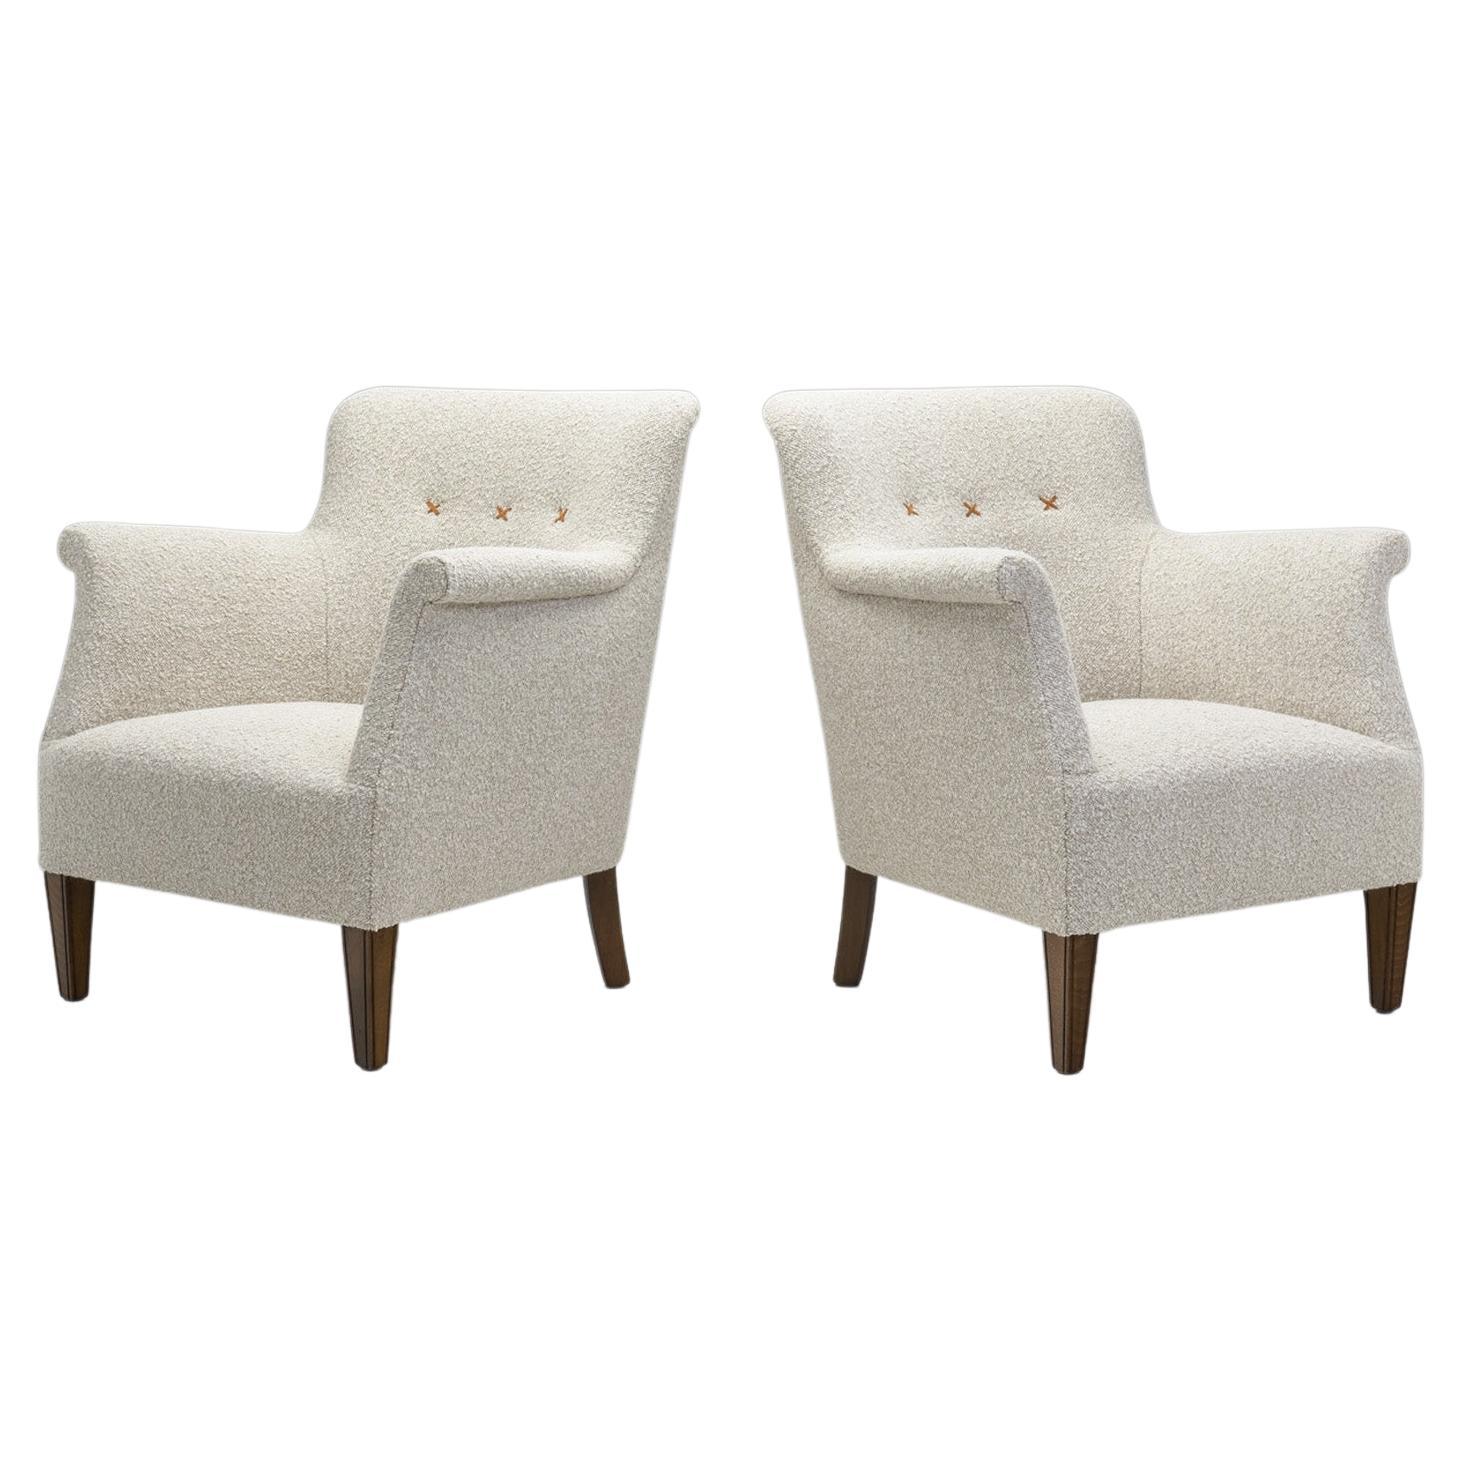 Pair of Danish Upholstered Easy Chairs with Beech Legs, Denmark 1940s For Sale